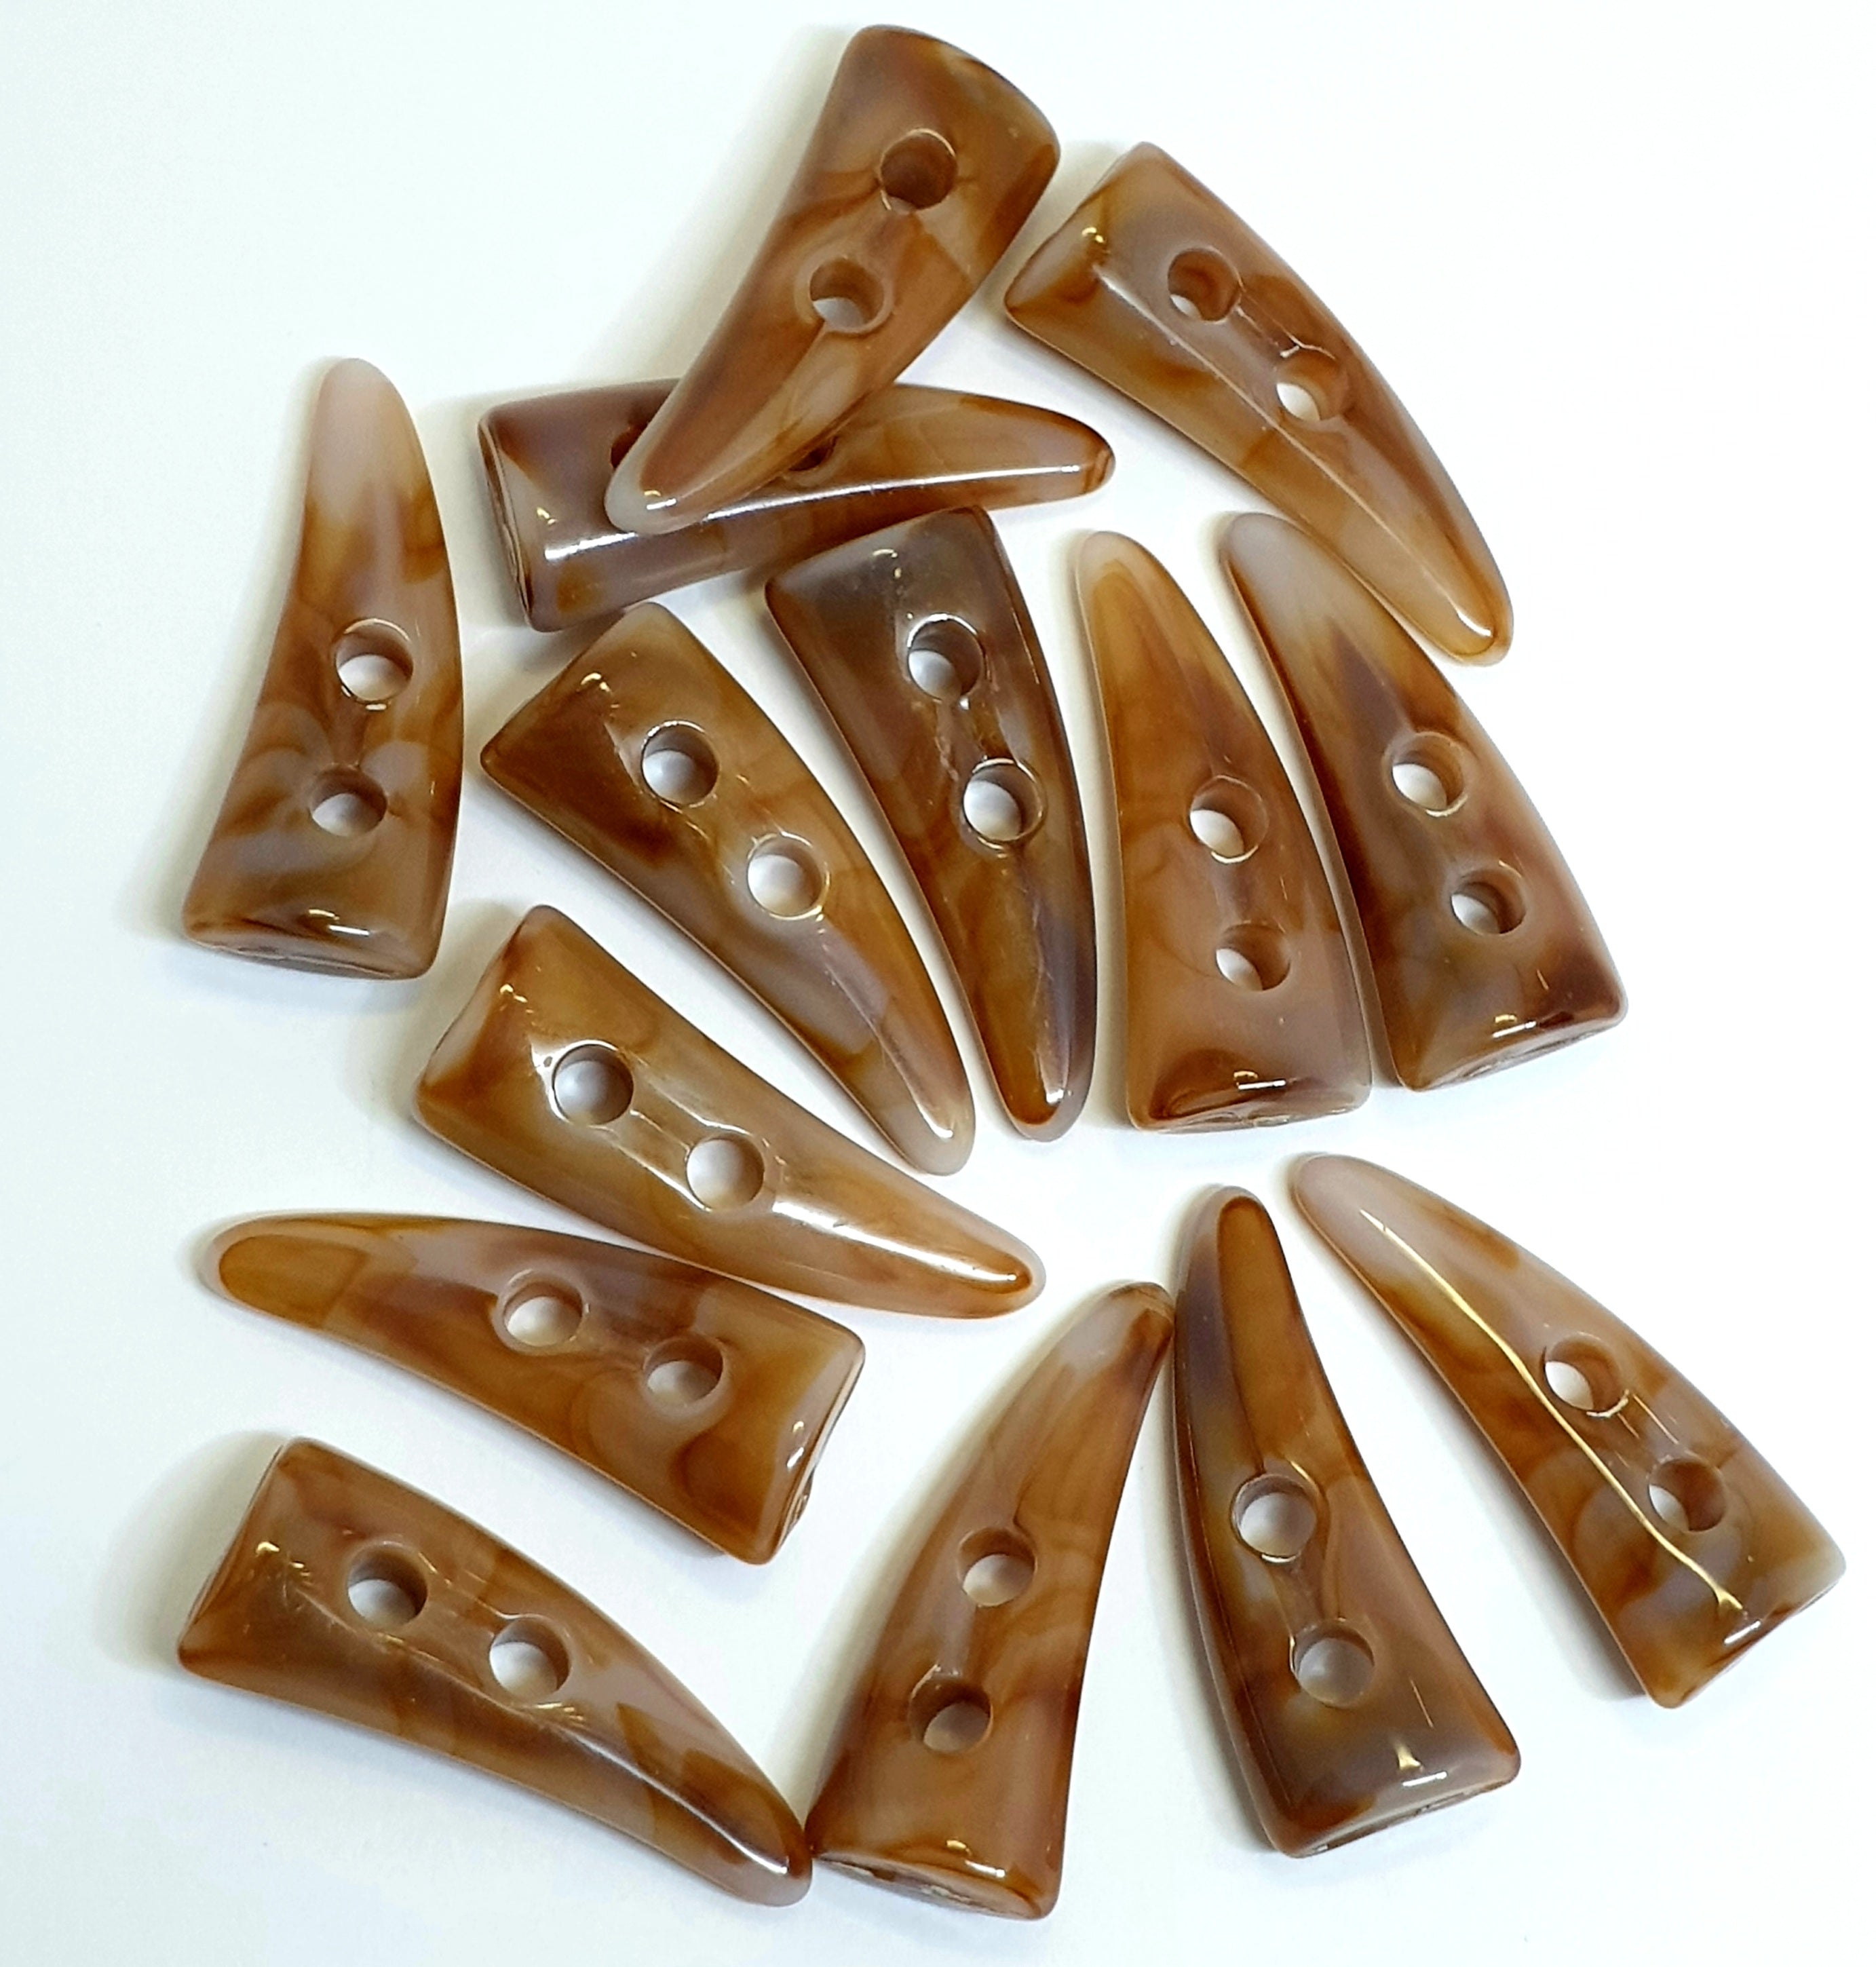 MajorCrafts 16pcs 30mm Brown and White Horn/Tooth Shaped 2 Holes Sewing Toggle Acrylic Buttons